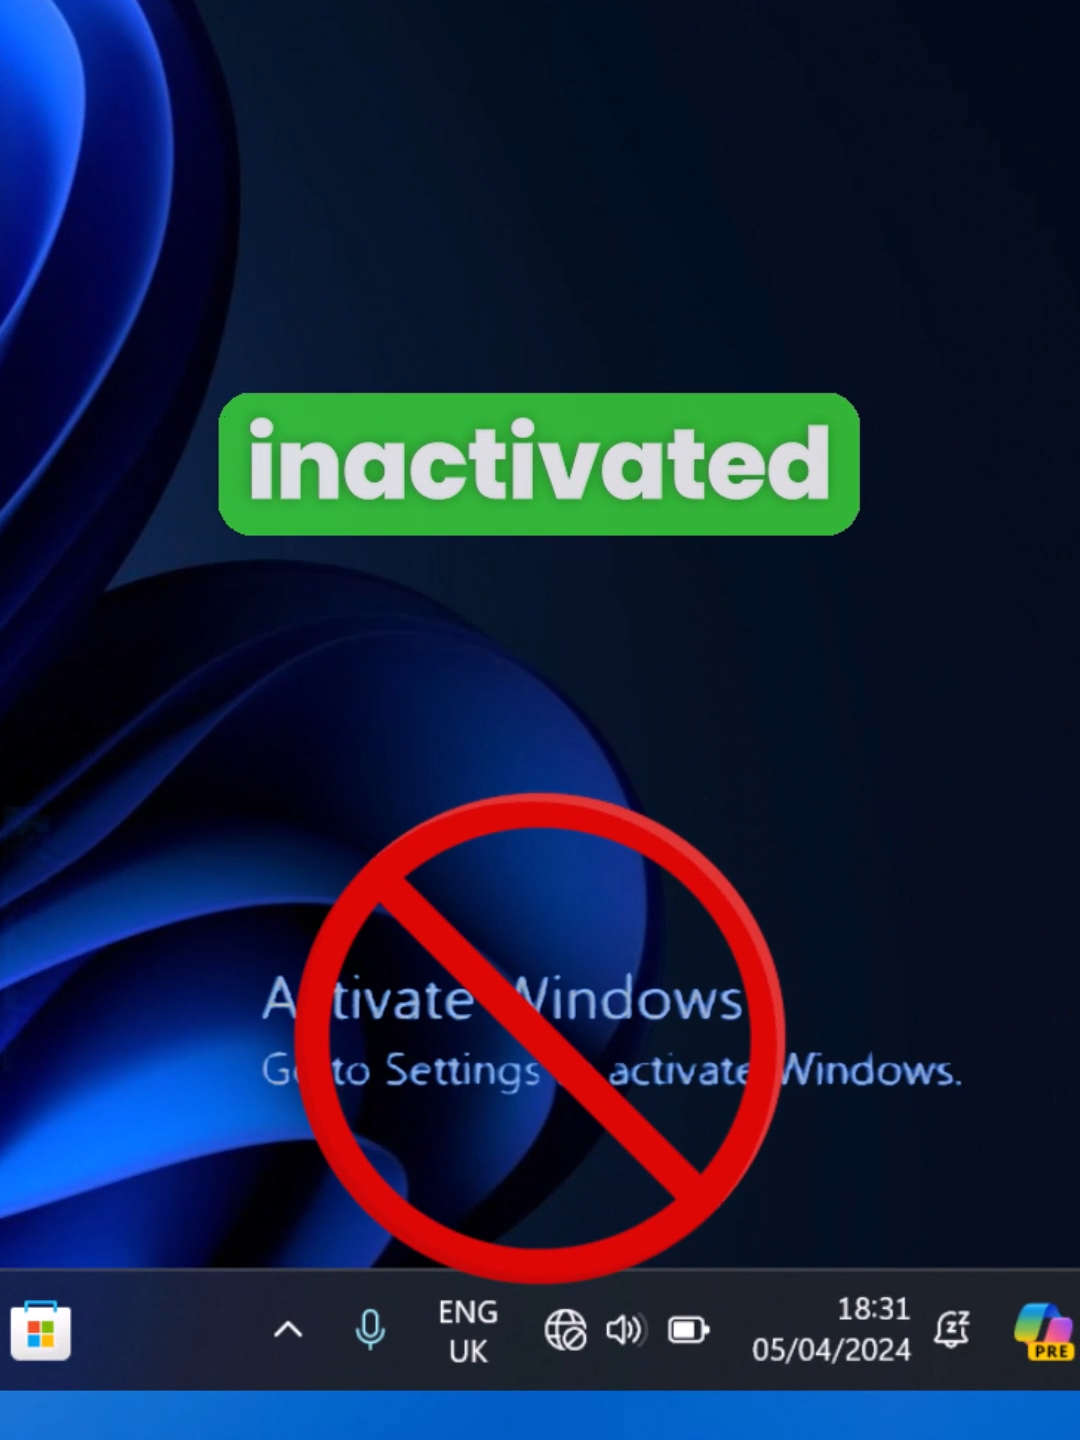 Activate Your Windows: Simple and Easy  Say Goodbye to the Windows  Activation Watermark  #windows #windowsactivation #tips #tech #techtips #pc #computer #pctips #fouryou #techhacks #goodfriday #airpodspro #viral #fyp